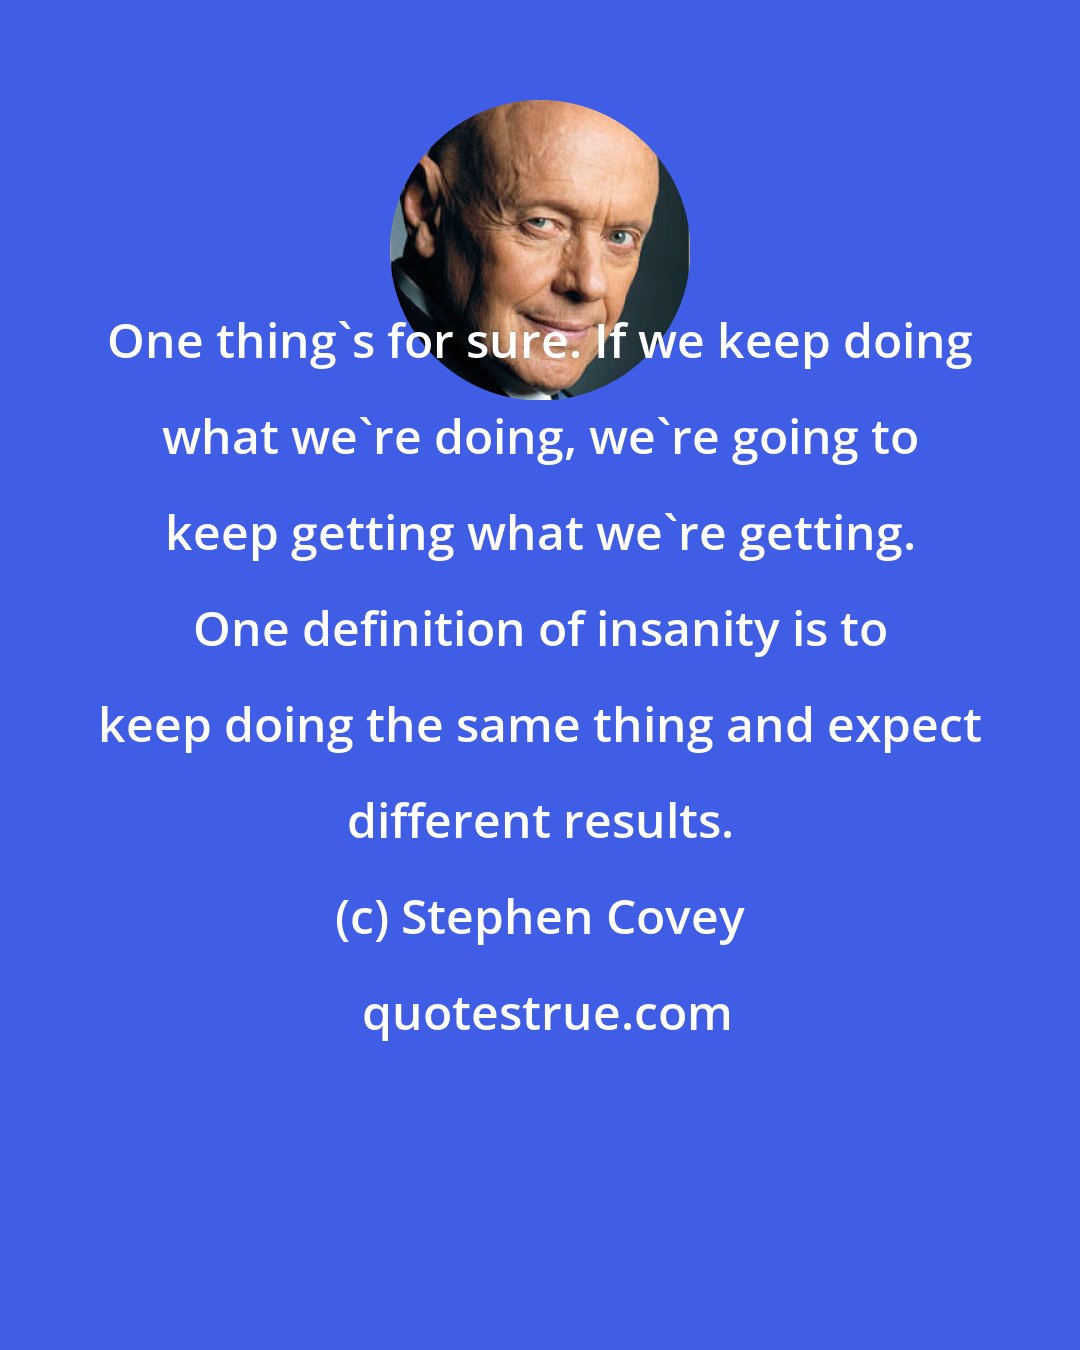 Stephen Covey: One thing's for sure. If we keep doing what we're doing, we're going to keep getting what we're getting. One definition of insanity is to keep doing the same thing and expect different results.